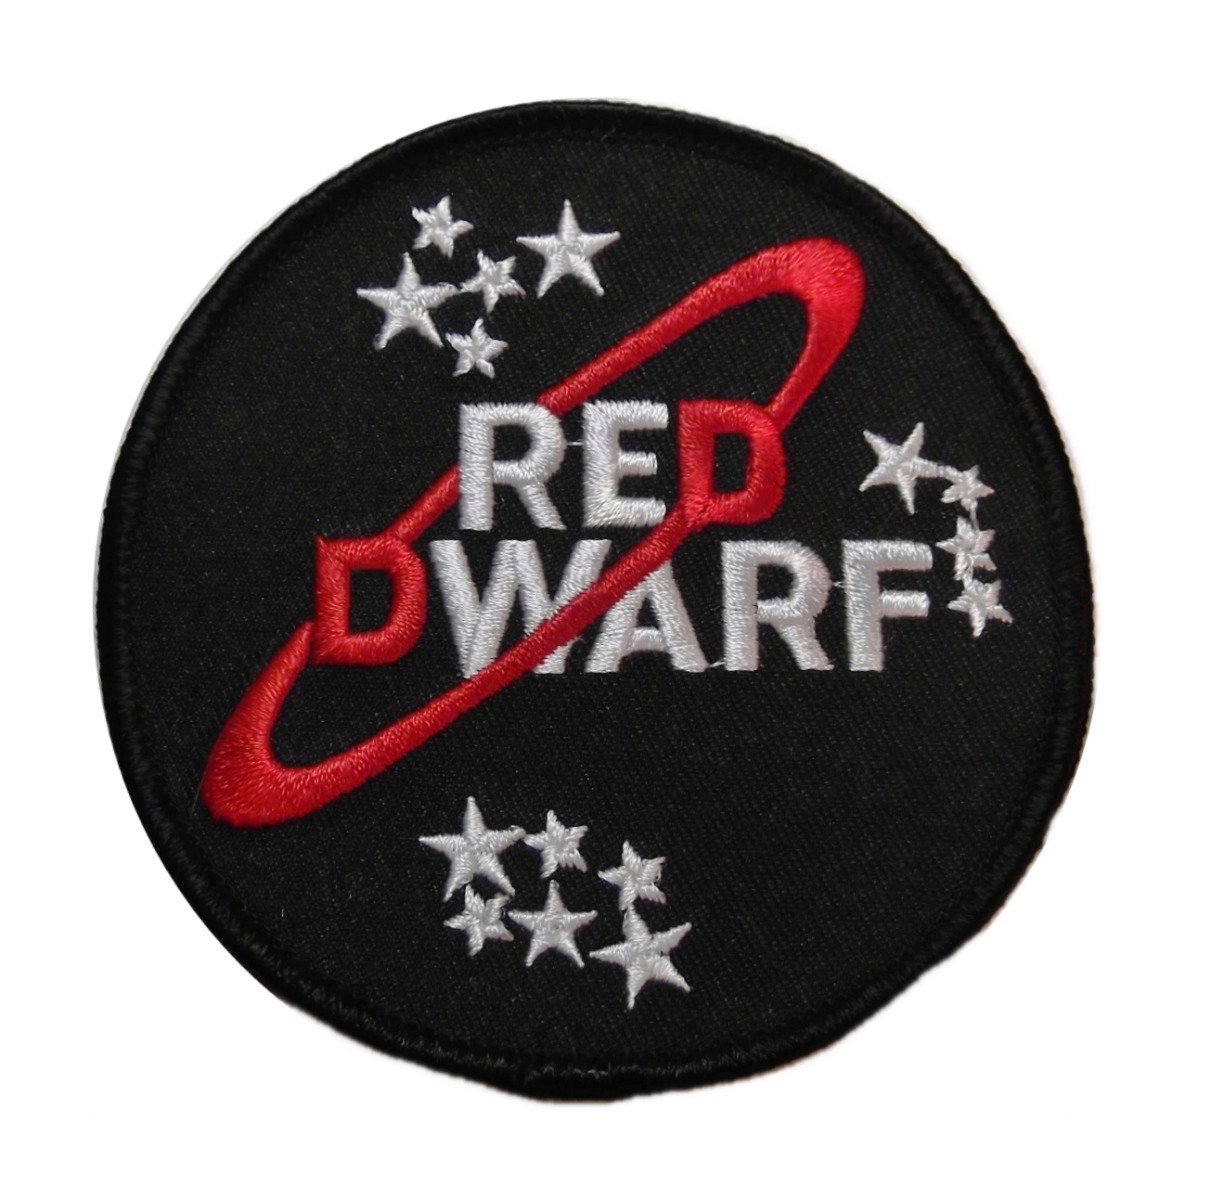 RED DWARF BBC TV Series Logo Embroidered PATCH.